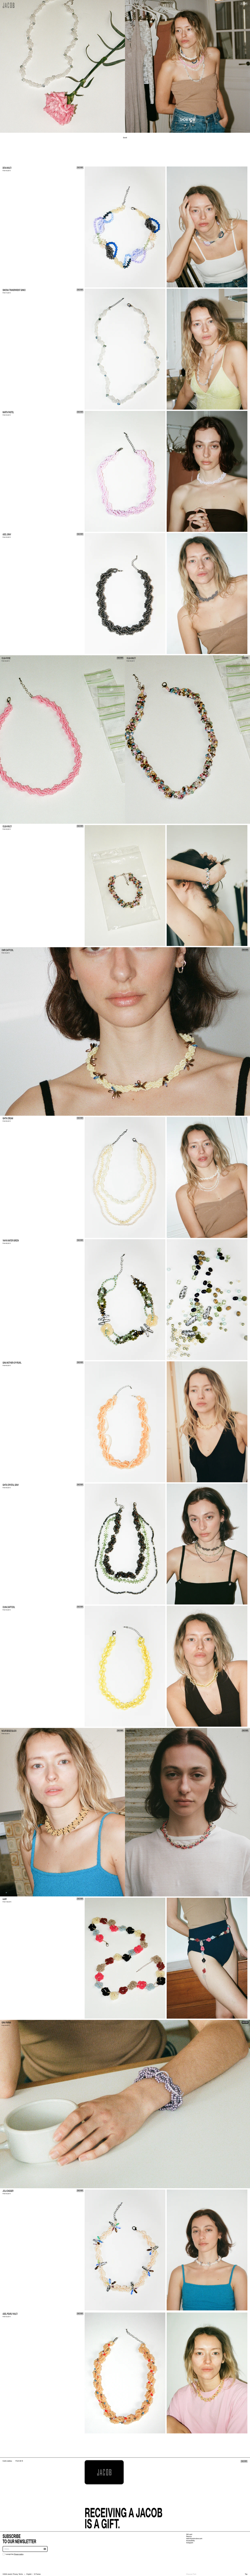 Jacob Landing Page Example: Our first collection of handmade, unique and evolving necklaces, bracelets and belts.